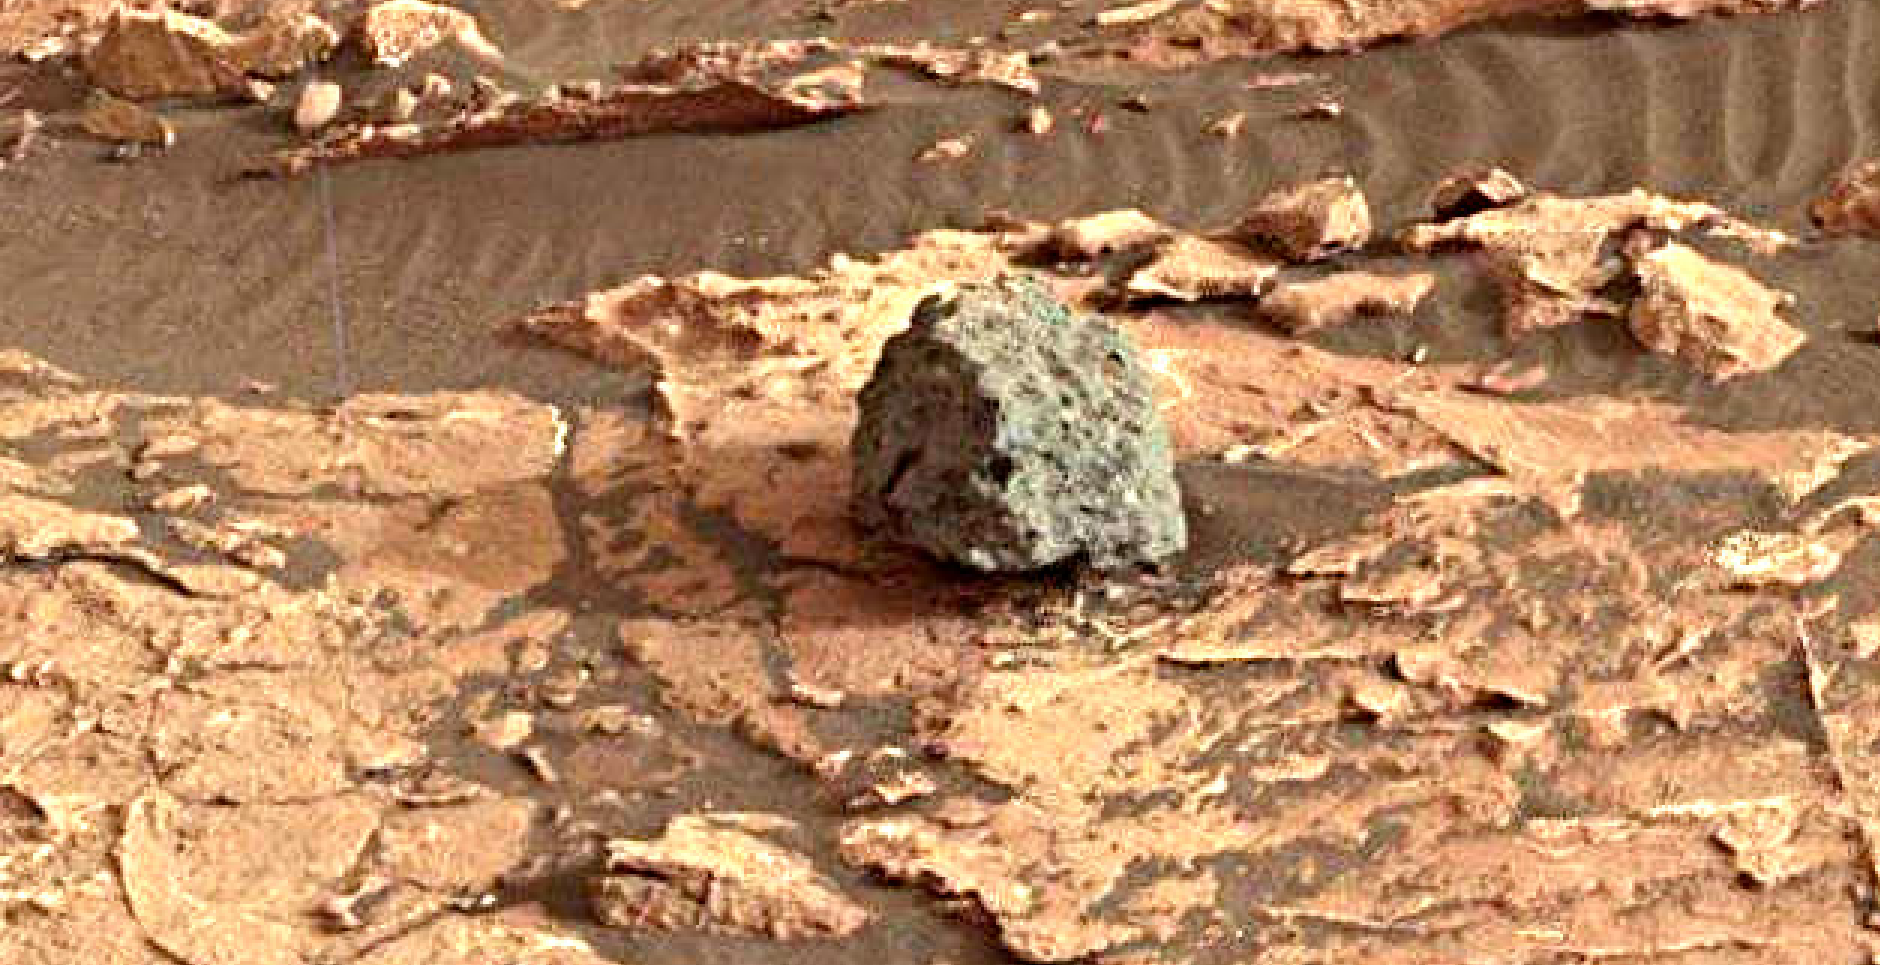 mars-sol-1512-anomaly-artifacts-14-was-life-on-mars